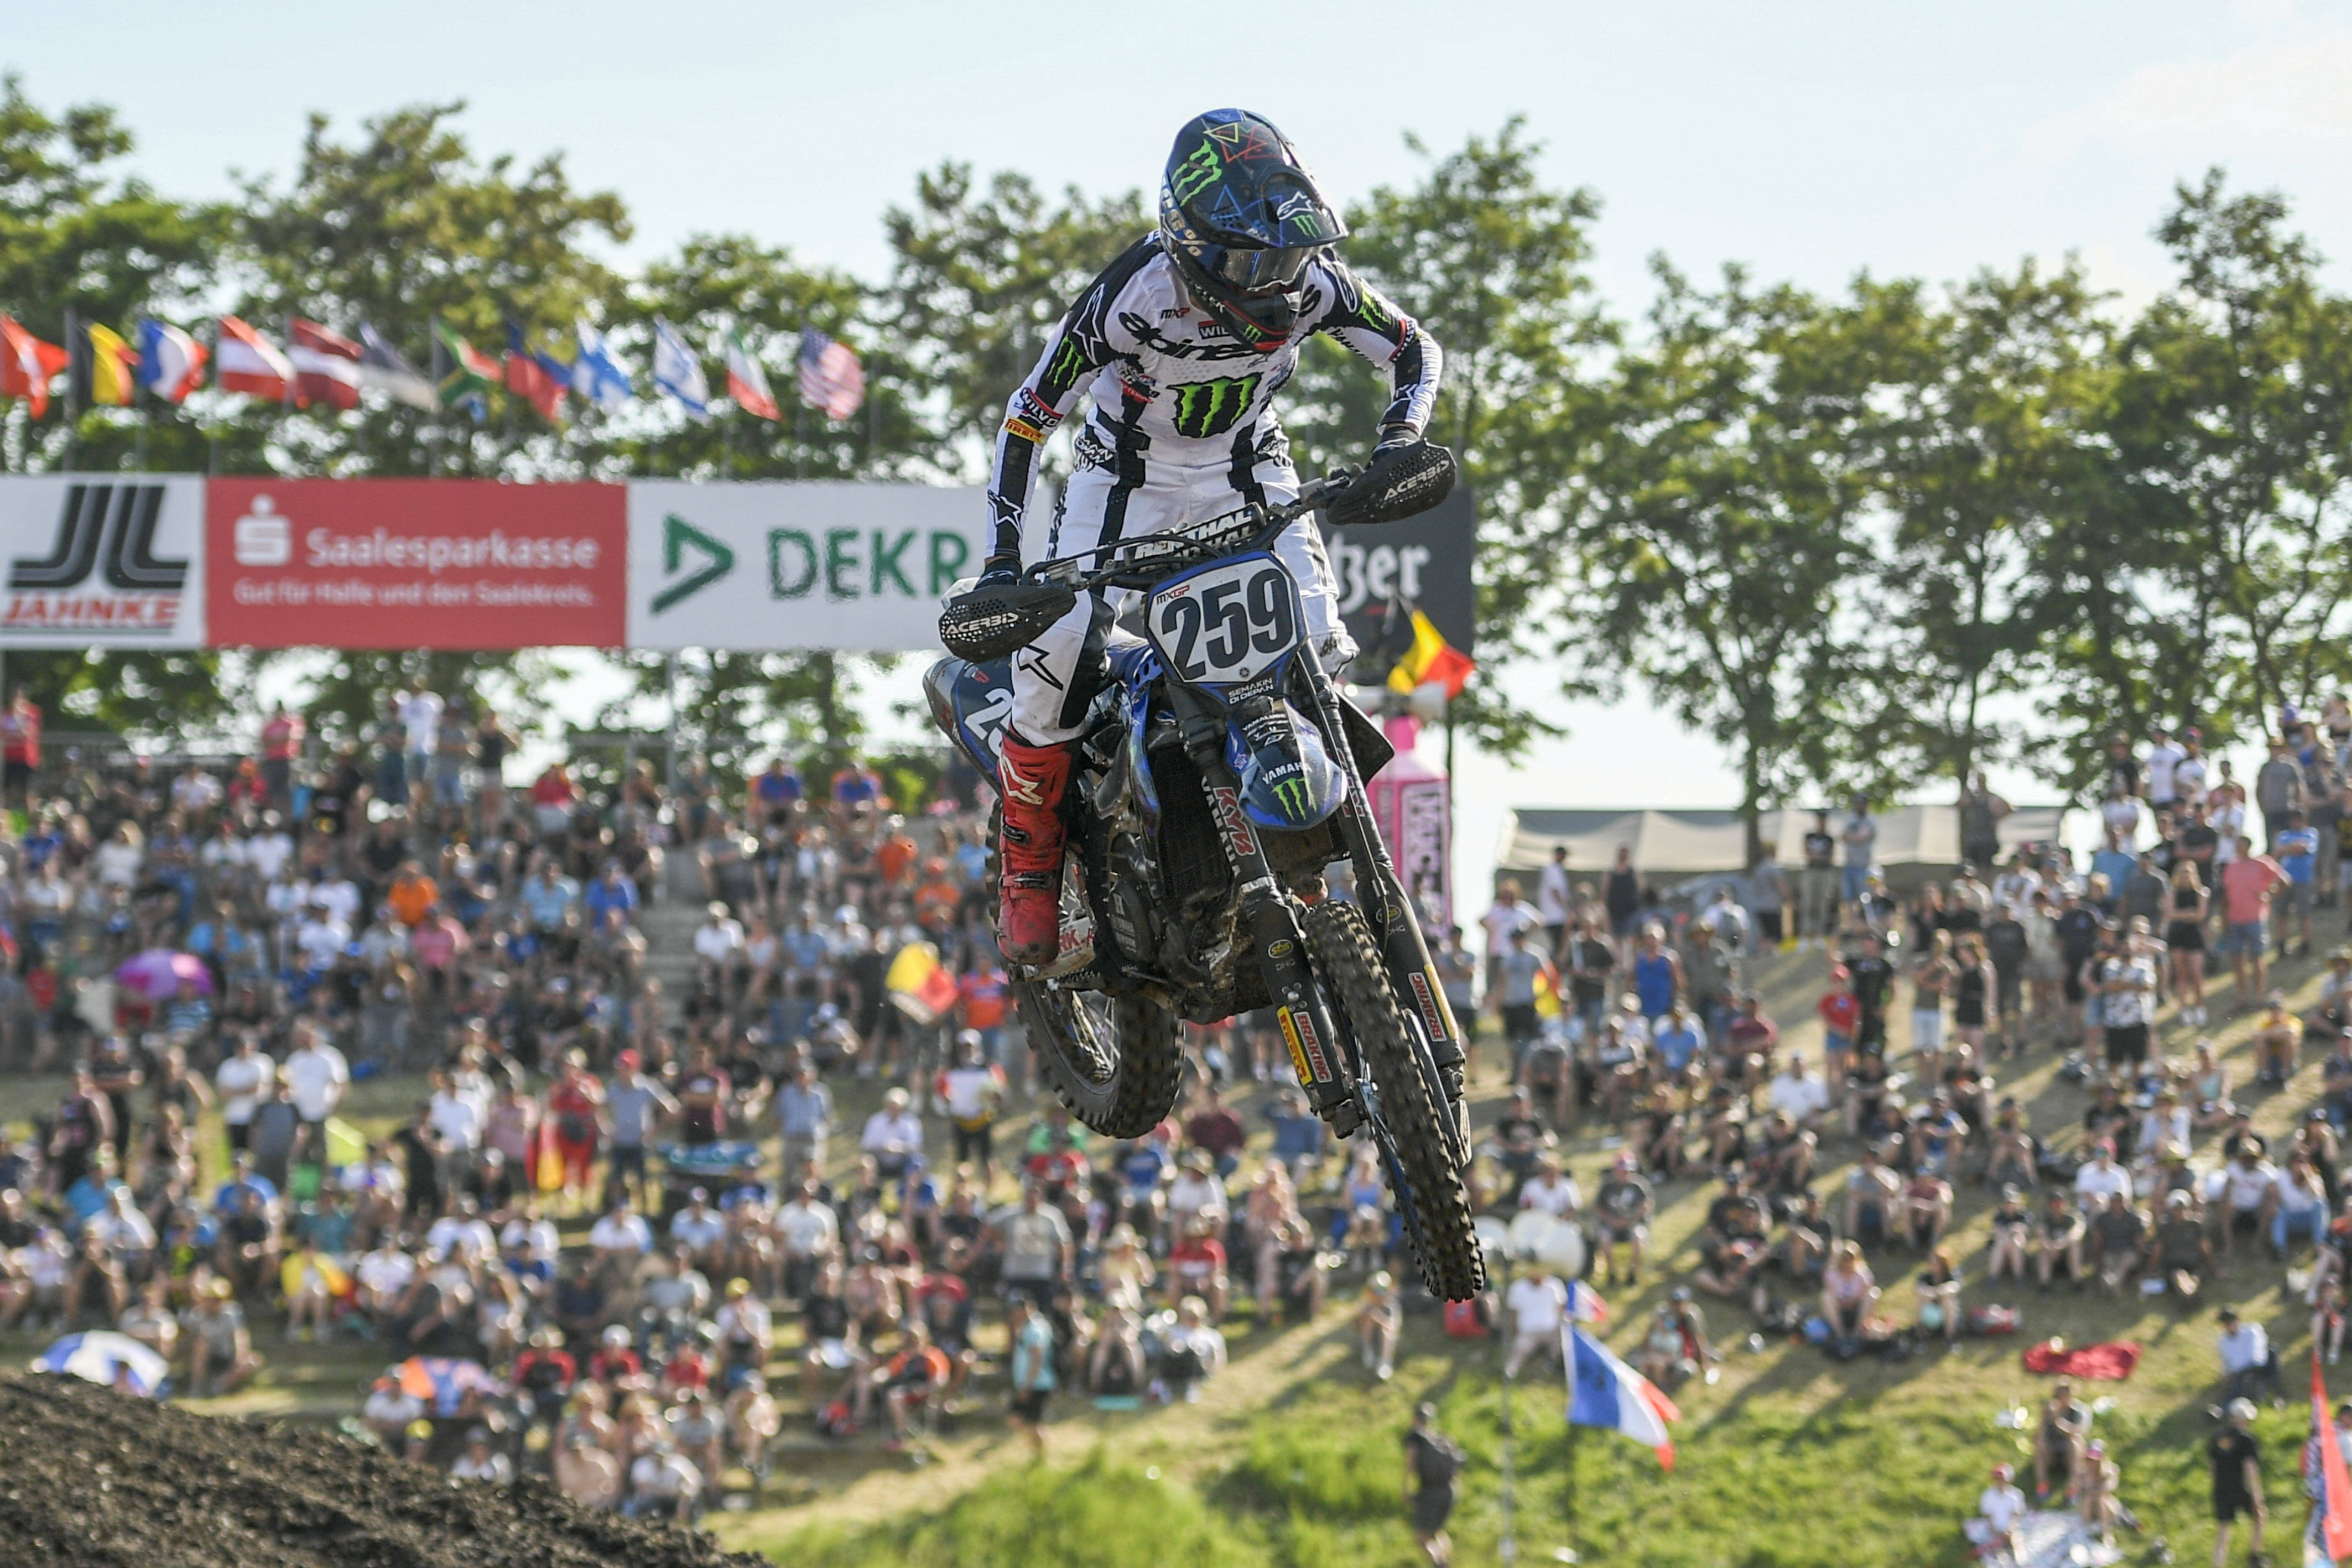 MXGP Turkey, Race 1 Free Live Stream Motocross Online - How to Watch and Stream Major League and College Sports